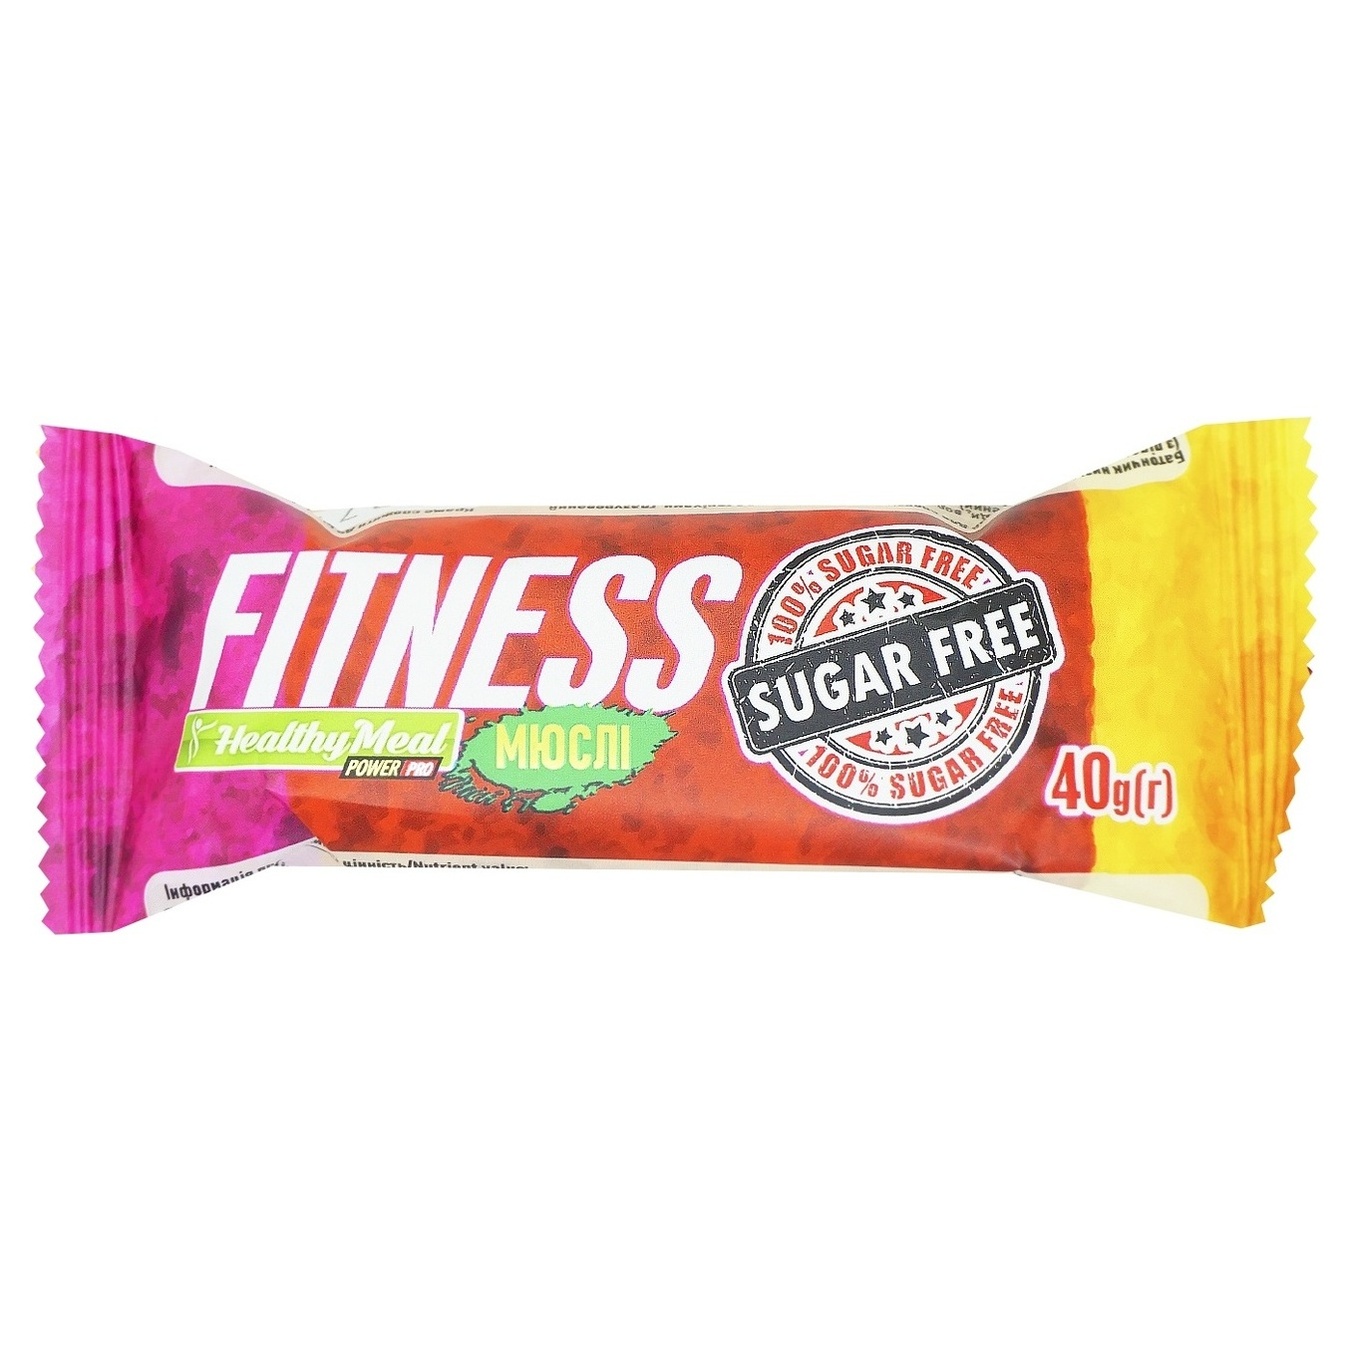 Fitness Low Carb Bar with Nuts 40g